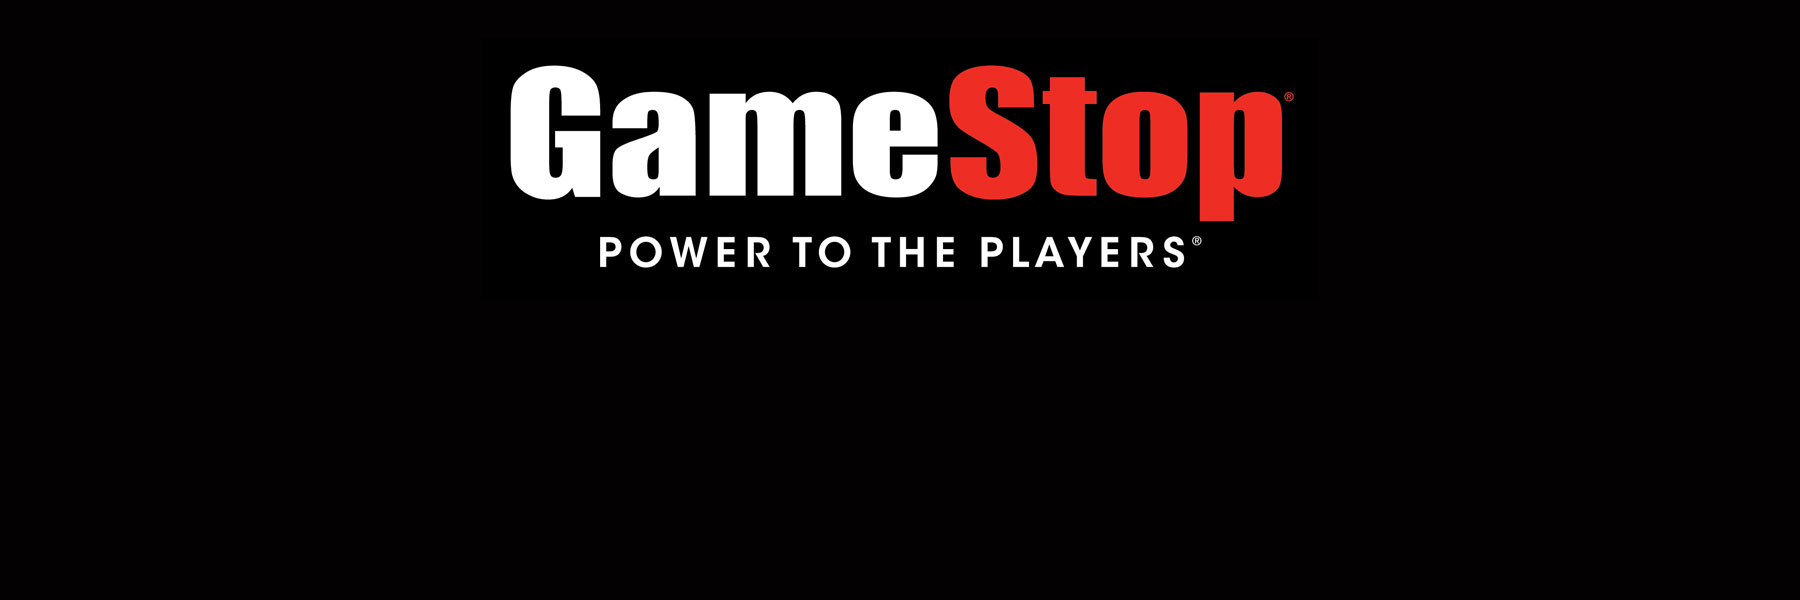 Game Stop: No Power to the Payers